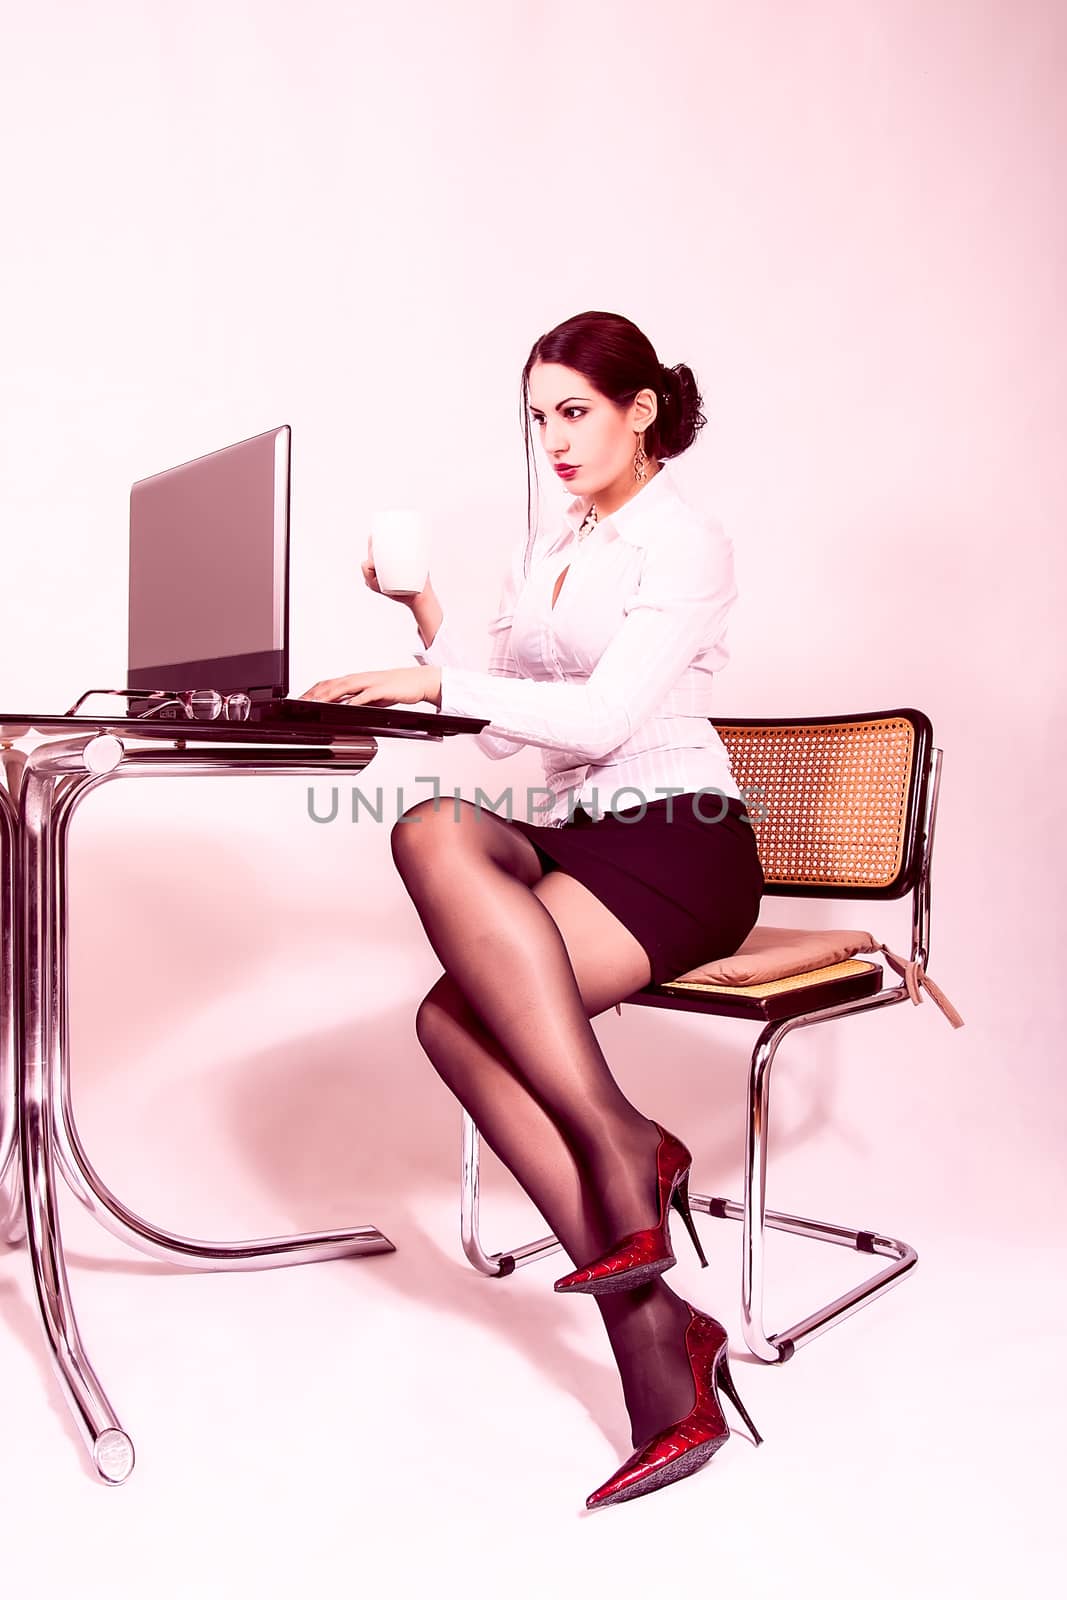 Attractive secretary working on lap top computer by dukibu